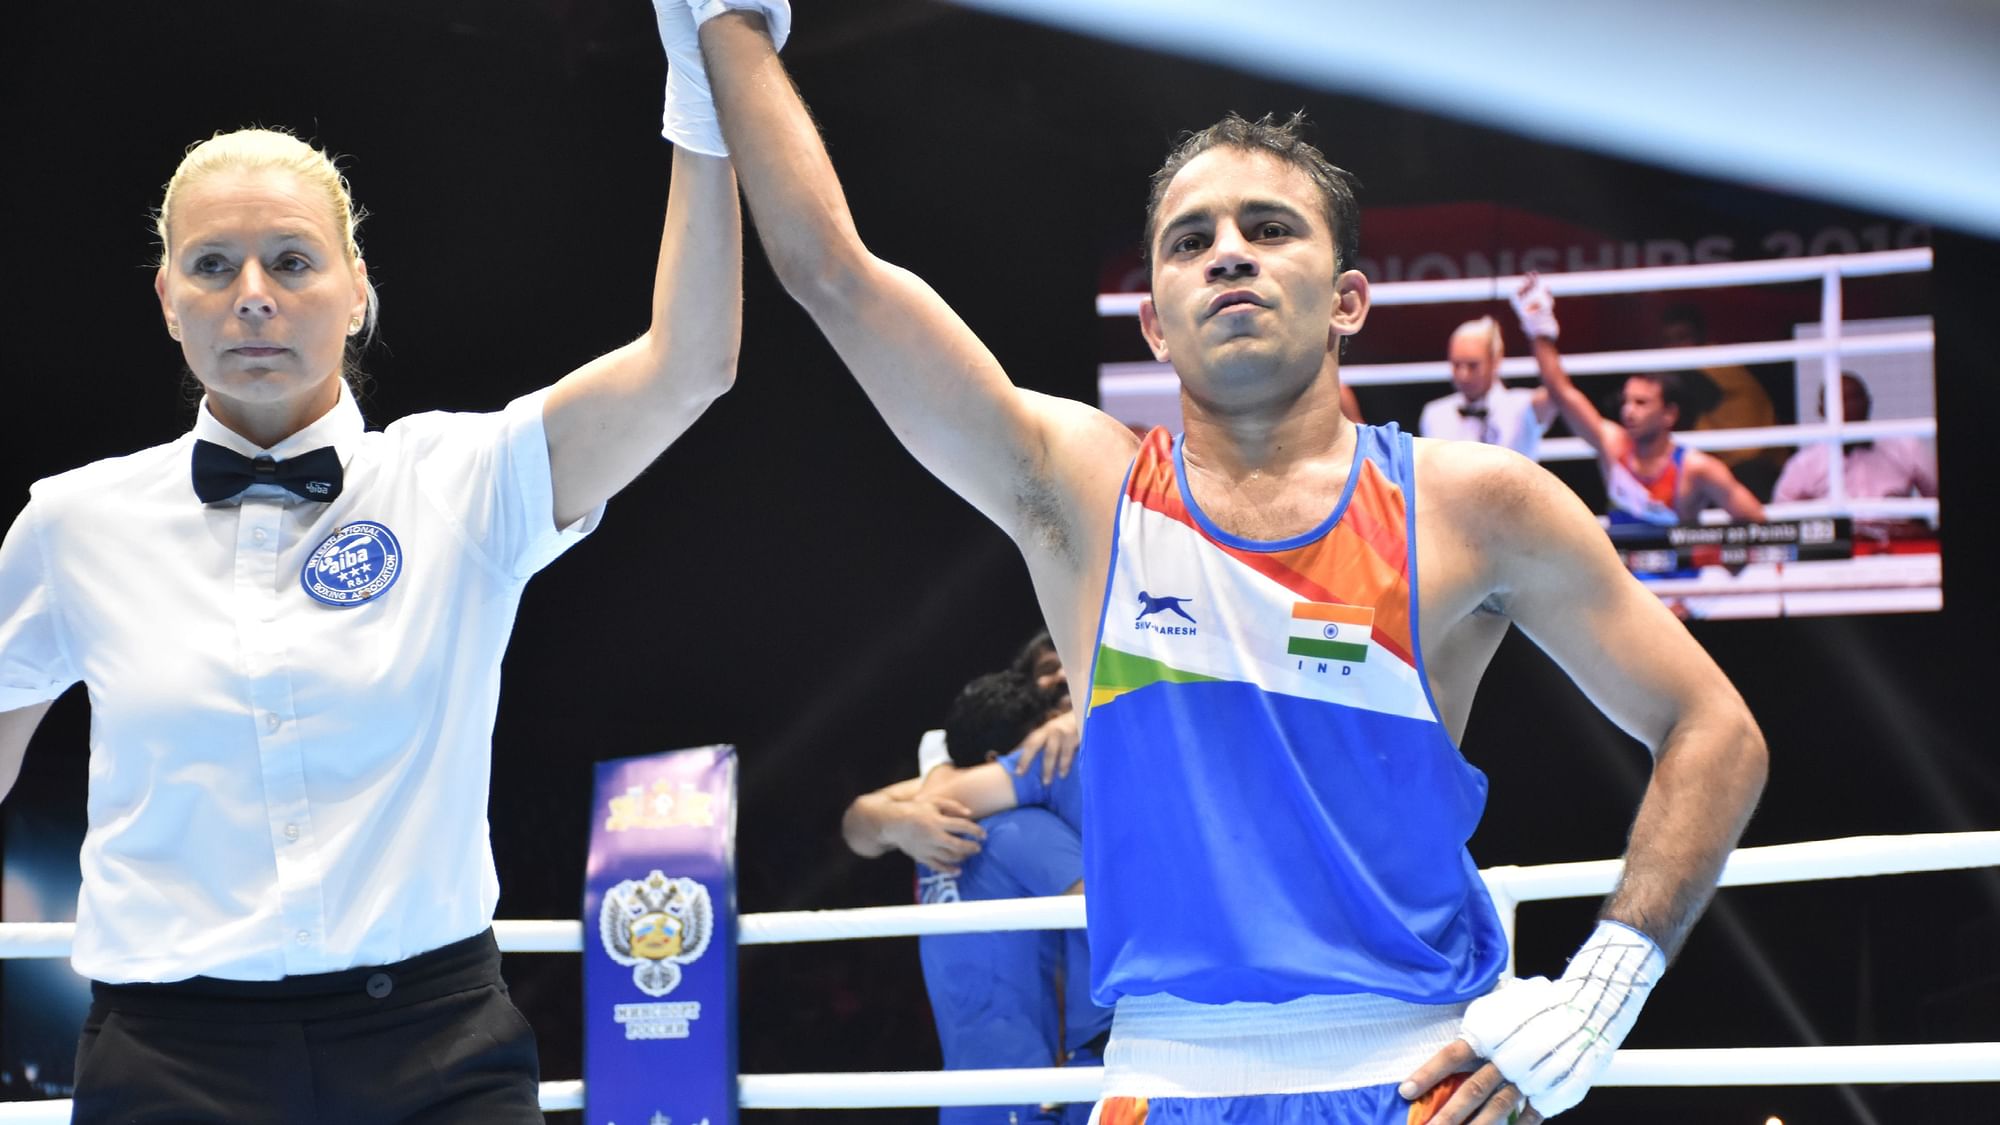 On Saturday, Amit Panghal will take on Uzbekistan’s Shakhobidin Zoirov, the reigning Olympic champion in the final.